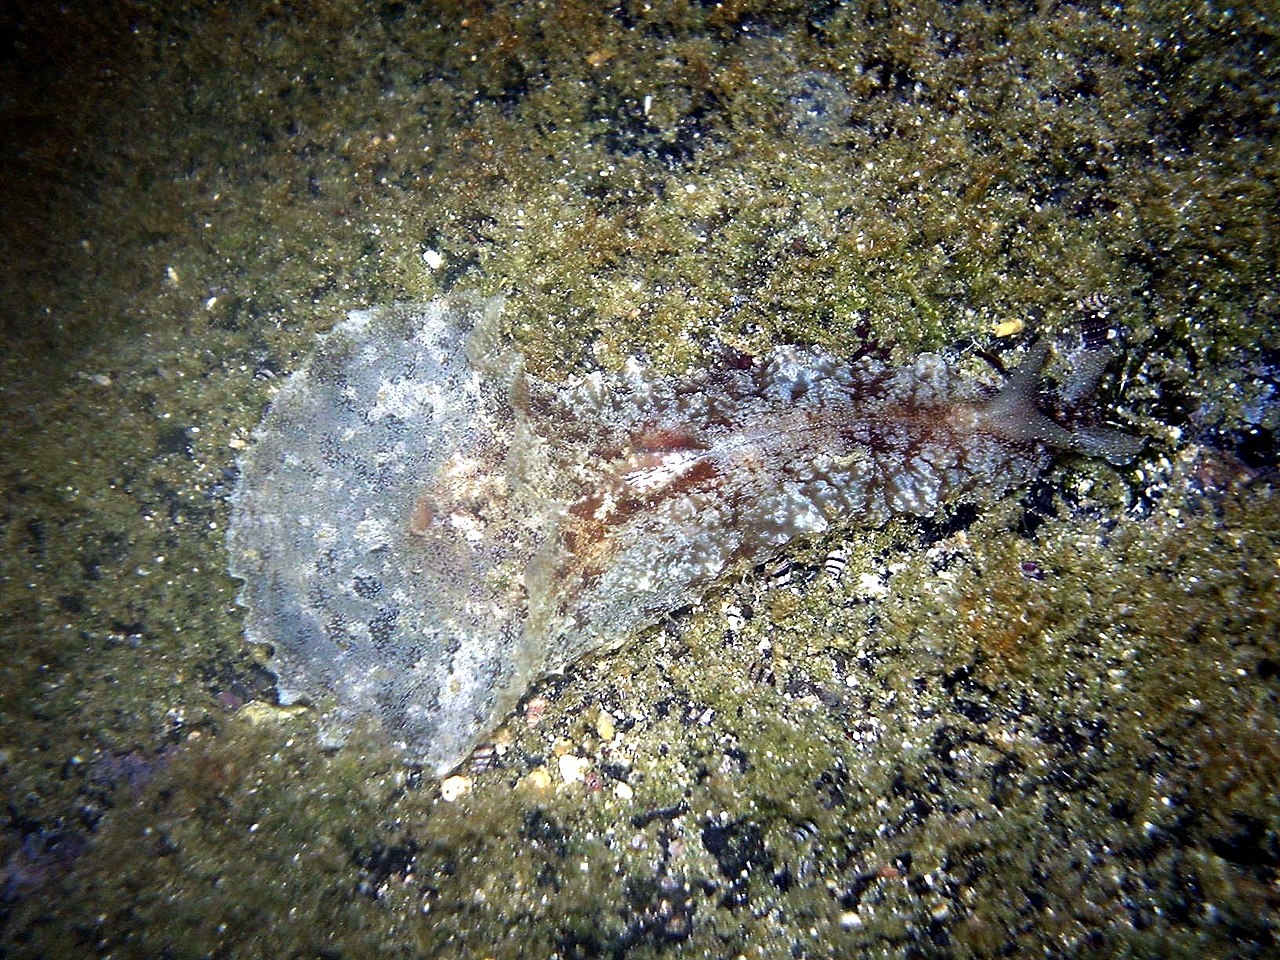 Lièvre de mer à oreille - Dolabella auricularia - <a href='https://commons.wikimedia.org/wiki/File:Sea_hare_DSC01663.jpg' title='via Wikimedia Commons'>Brocken Inaglory</a> / <a href='http://creativecommons.org/licenses/by-sa/3.0/'>CC BY-SA</a> - BioObs